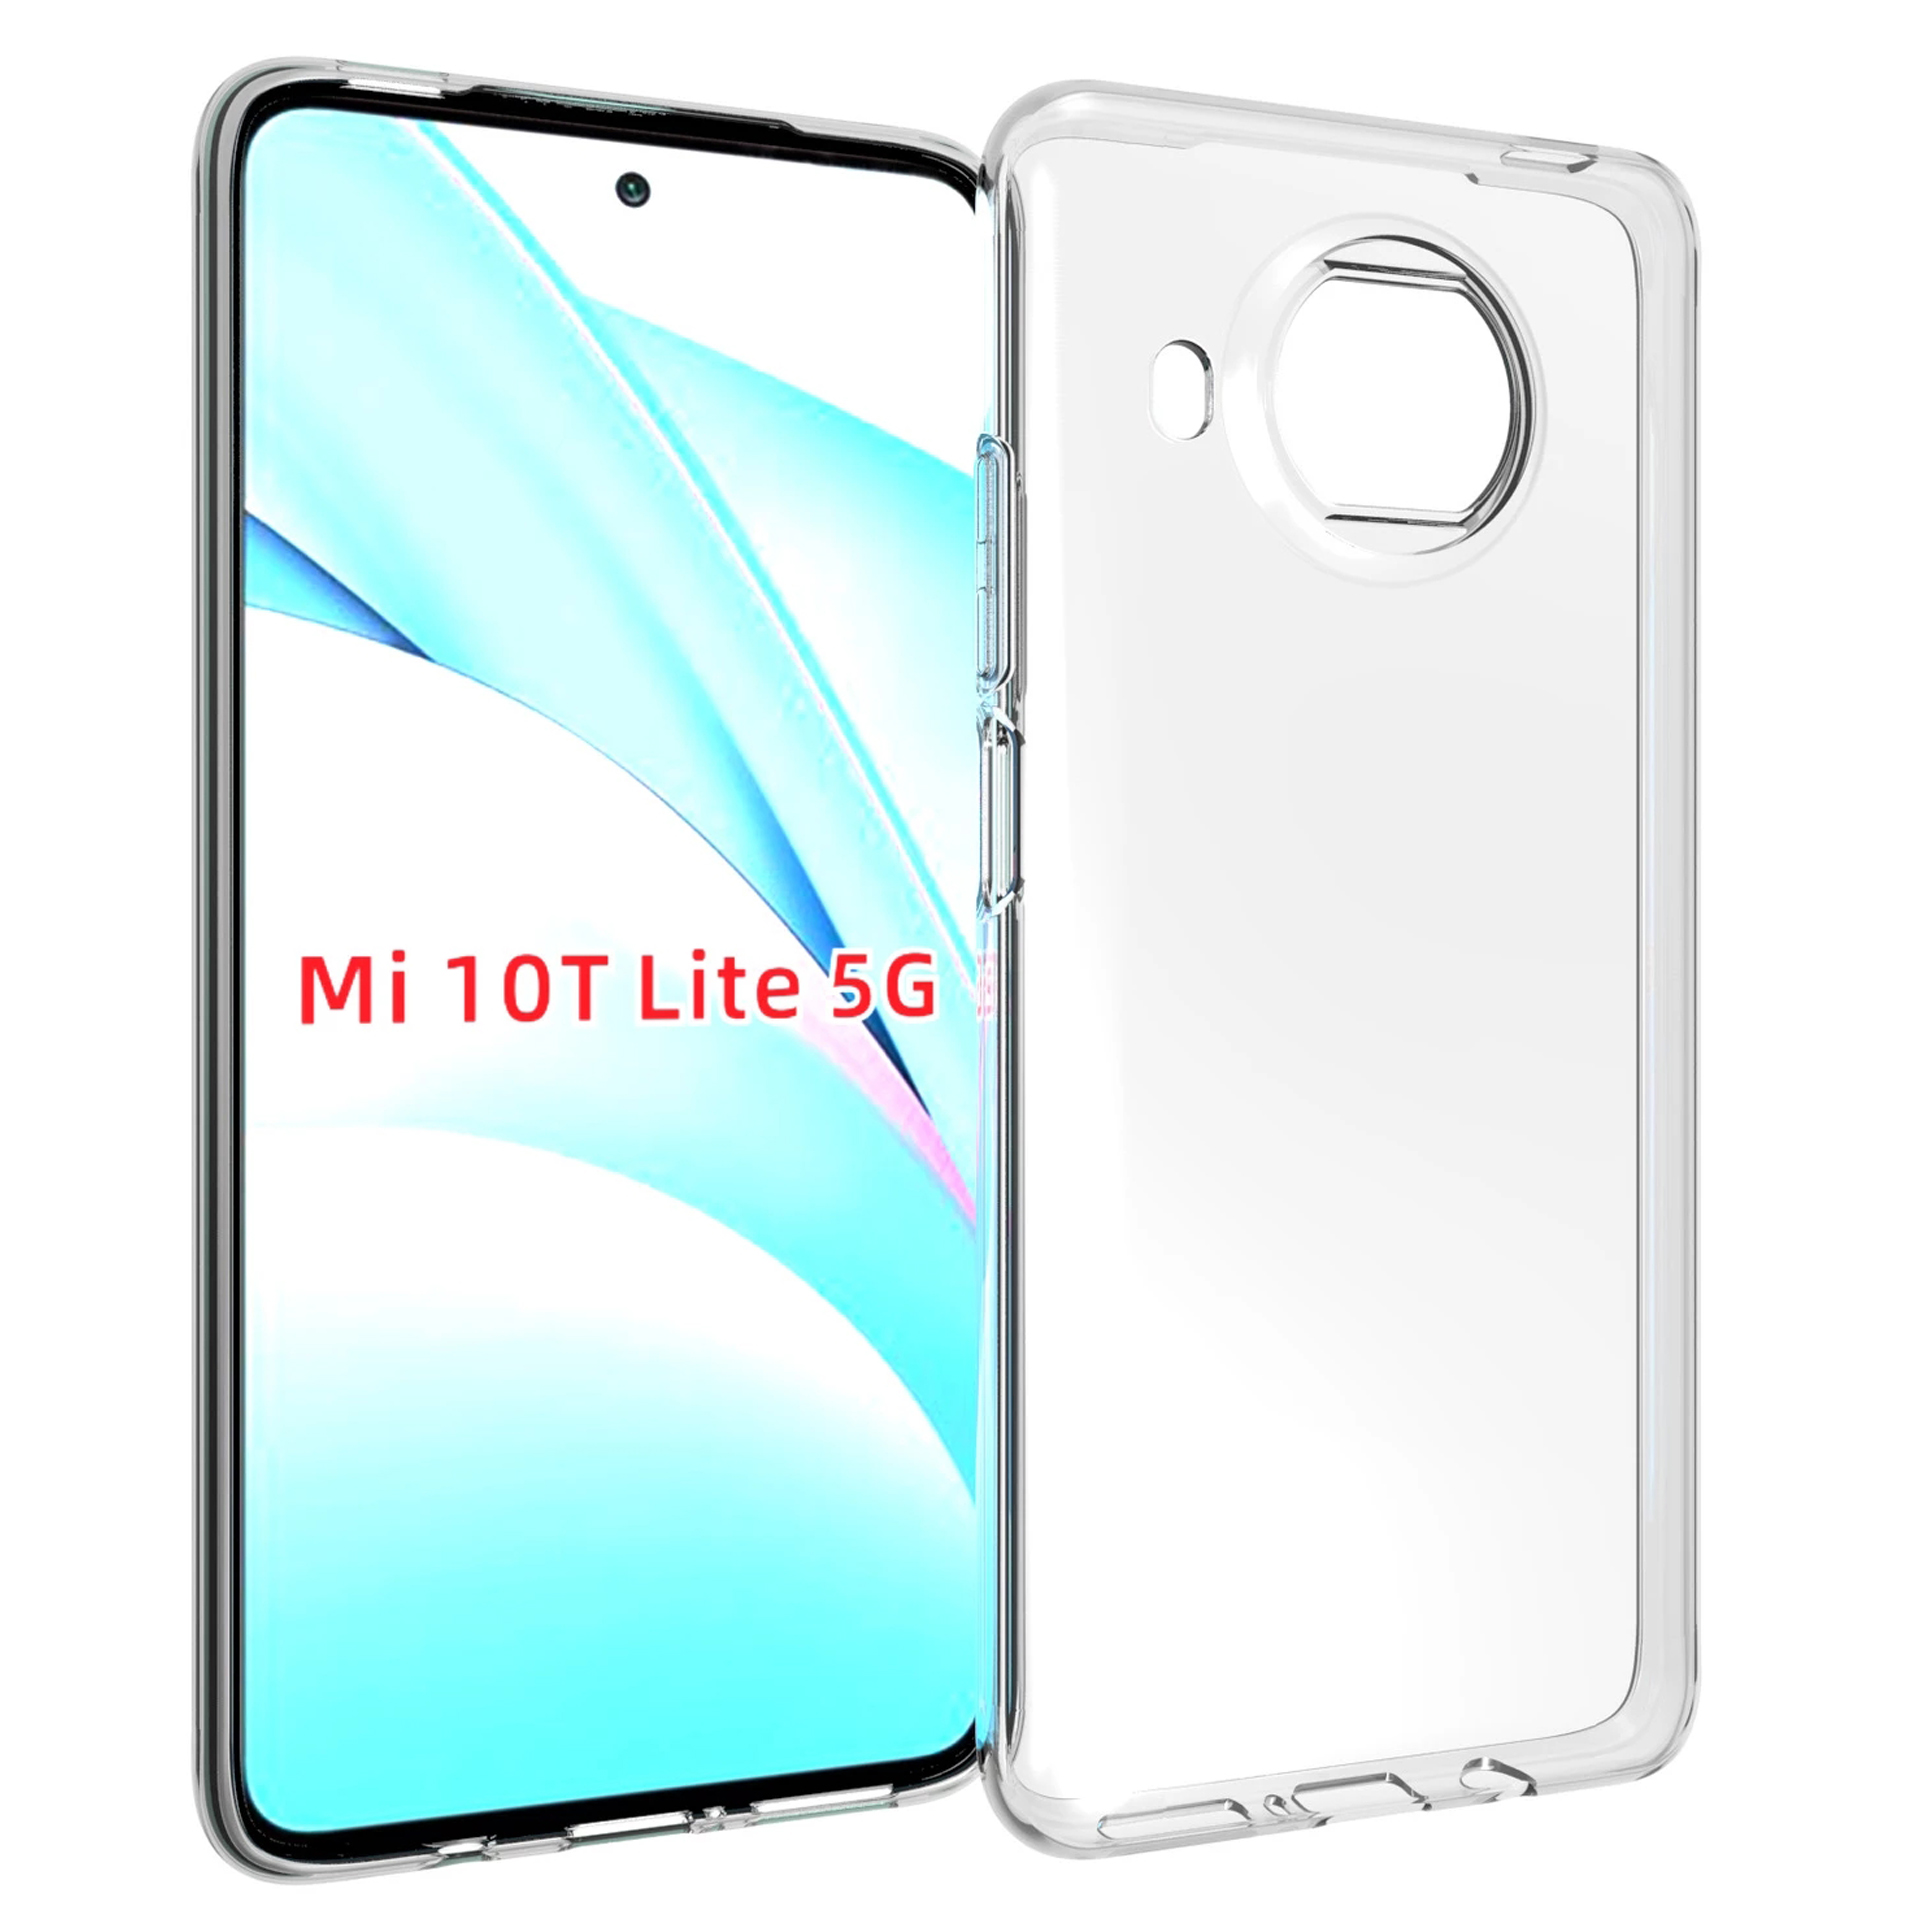 Bakeey-for-Xiaomi-Mi-10T-Lite-5G--Redmi-Note-9-Pro-5G-Case-Crystal-Clear-Transparent-Ultra-Thin-Non--1790619-2